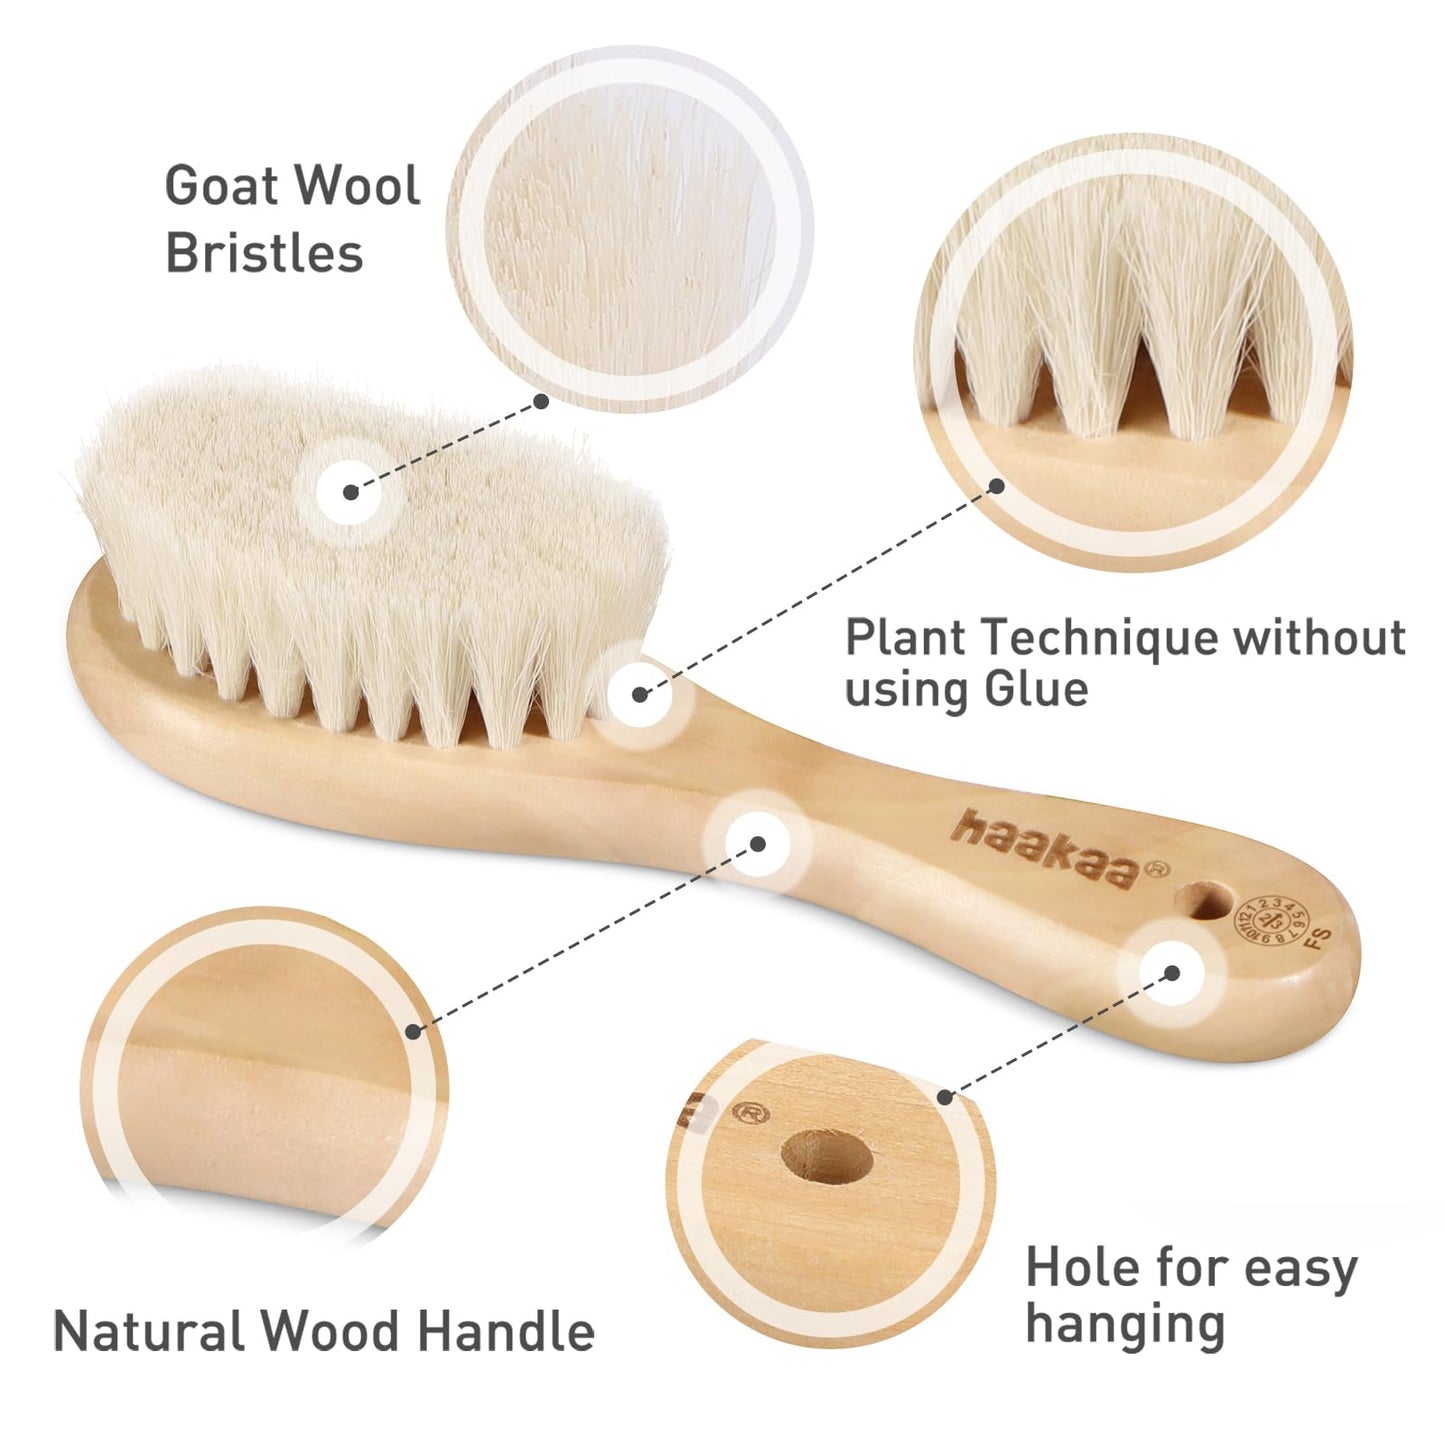 haakaa Wooden Baby Hair Brush for Newborns and Toddlers Baby Brush Natural Soft Goat Bristles Hairbrush, Ideal for Cradle Cap, Perfect Baby Registry Gift with Carry Pouch, 1PC